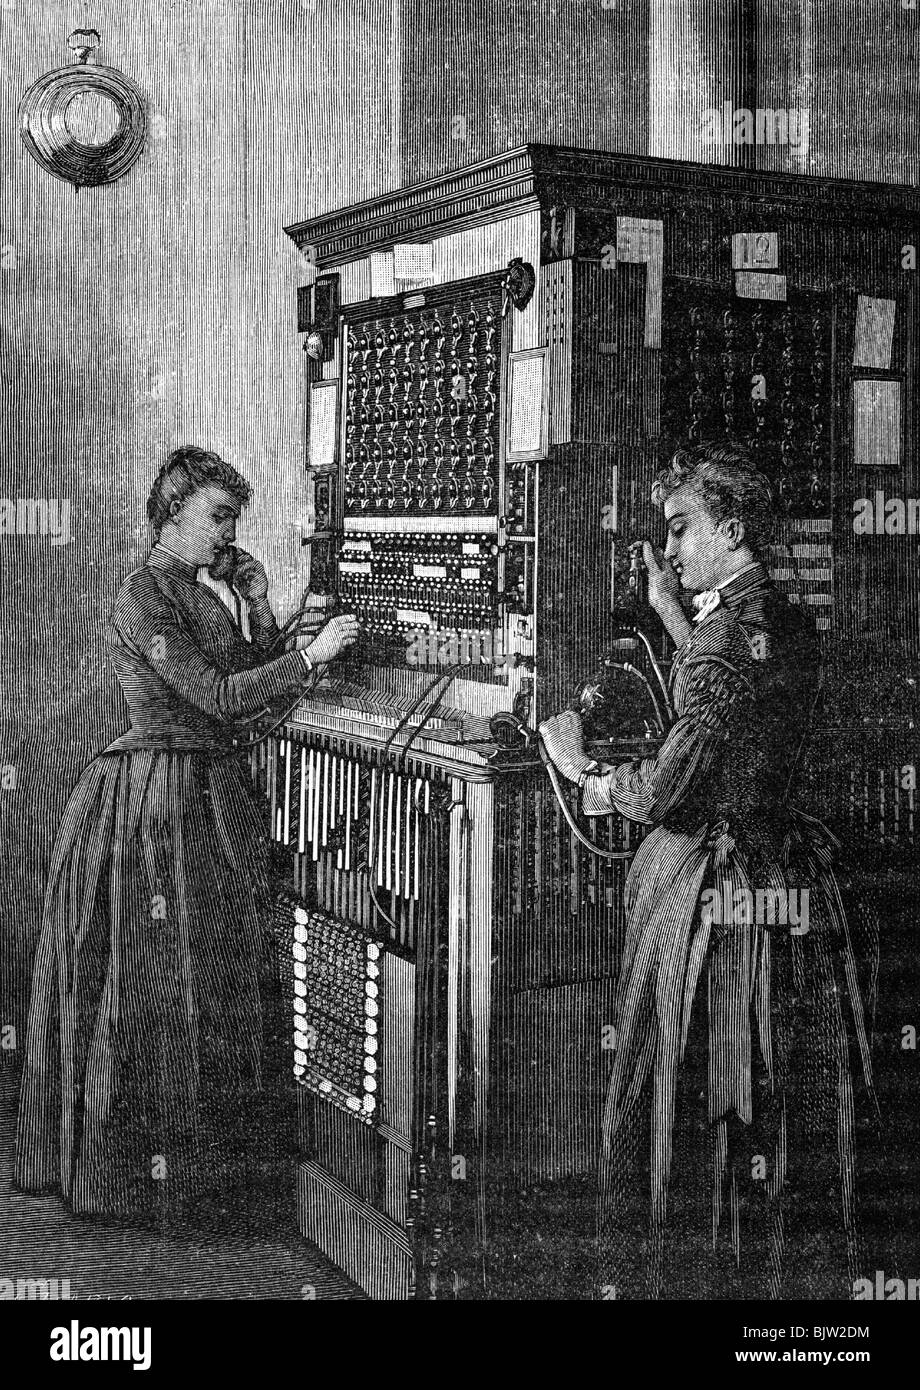 mail / post, telephone, telephone exchange, office at Avenue L'Opera, Paris, wood engraving, late 19th century, historic, historical, women, woman, telephonist, switchboard operator, telephonists, switchboard operators, profession, professions, public telephone, telephone switch, telephone switches, relaying, switching, exchange, exchanges, people, Stock Photo